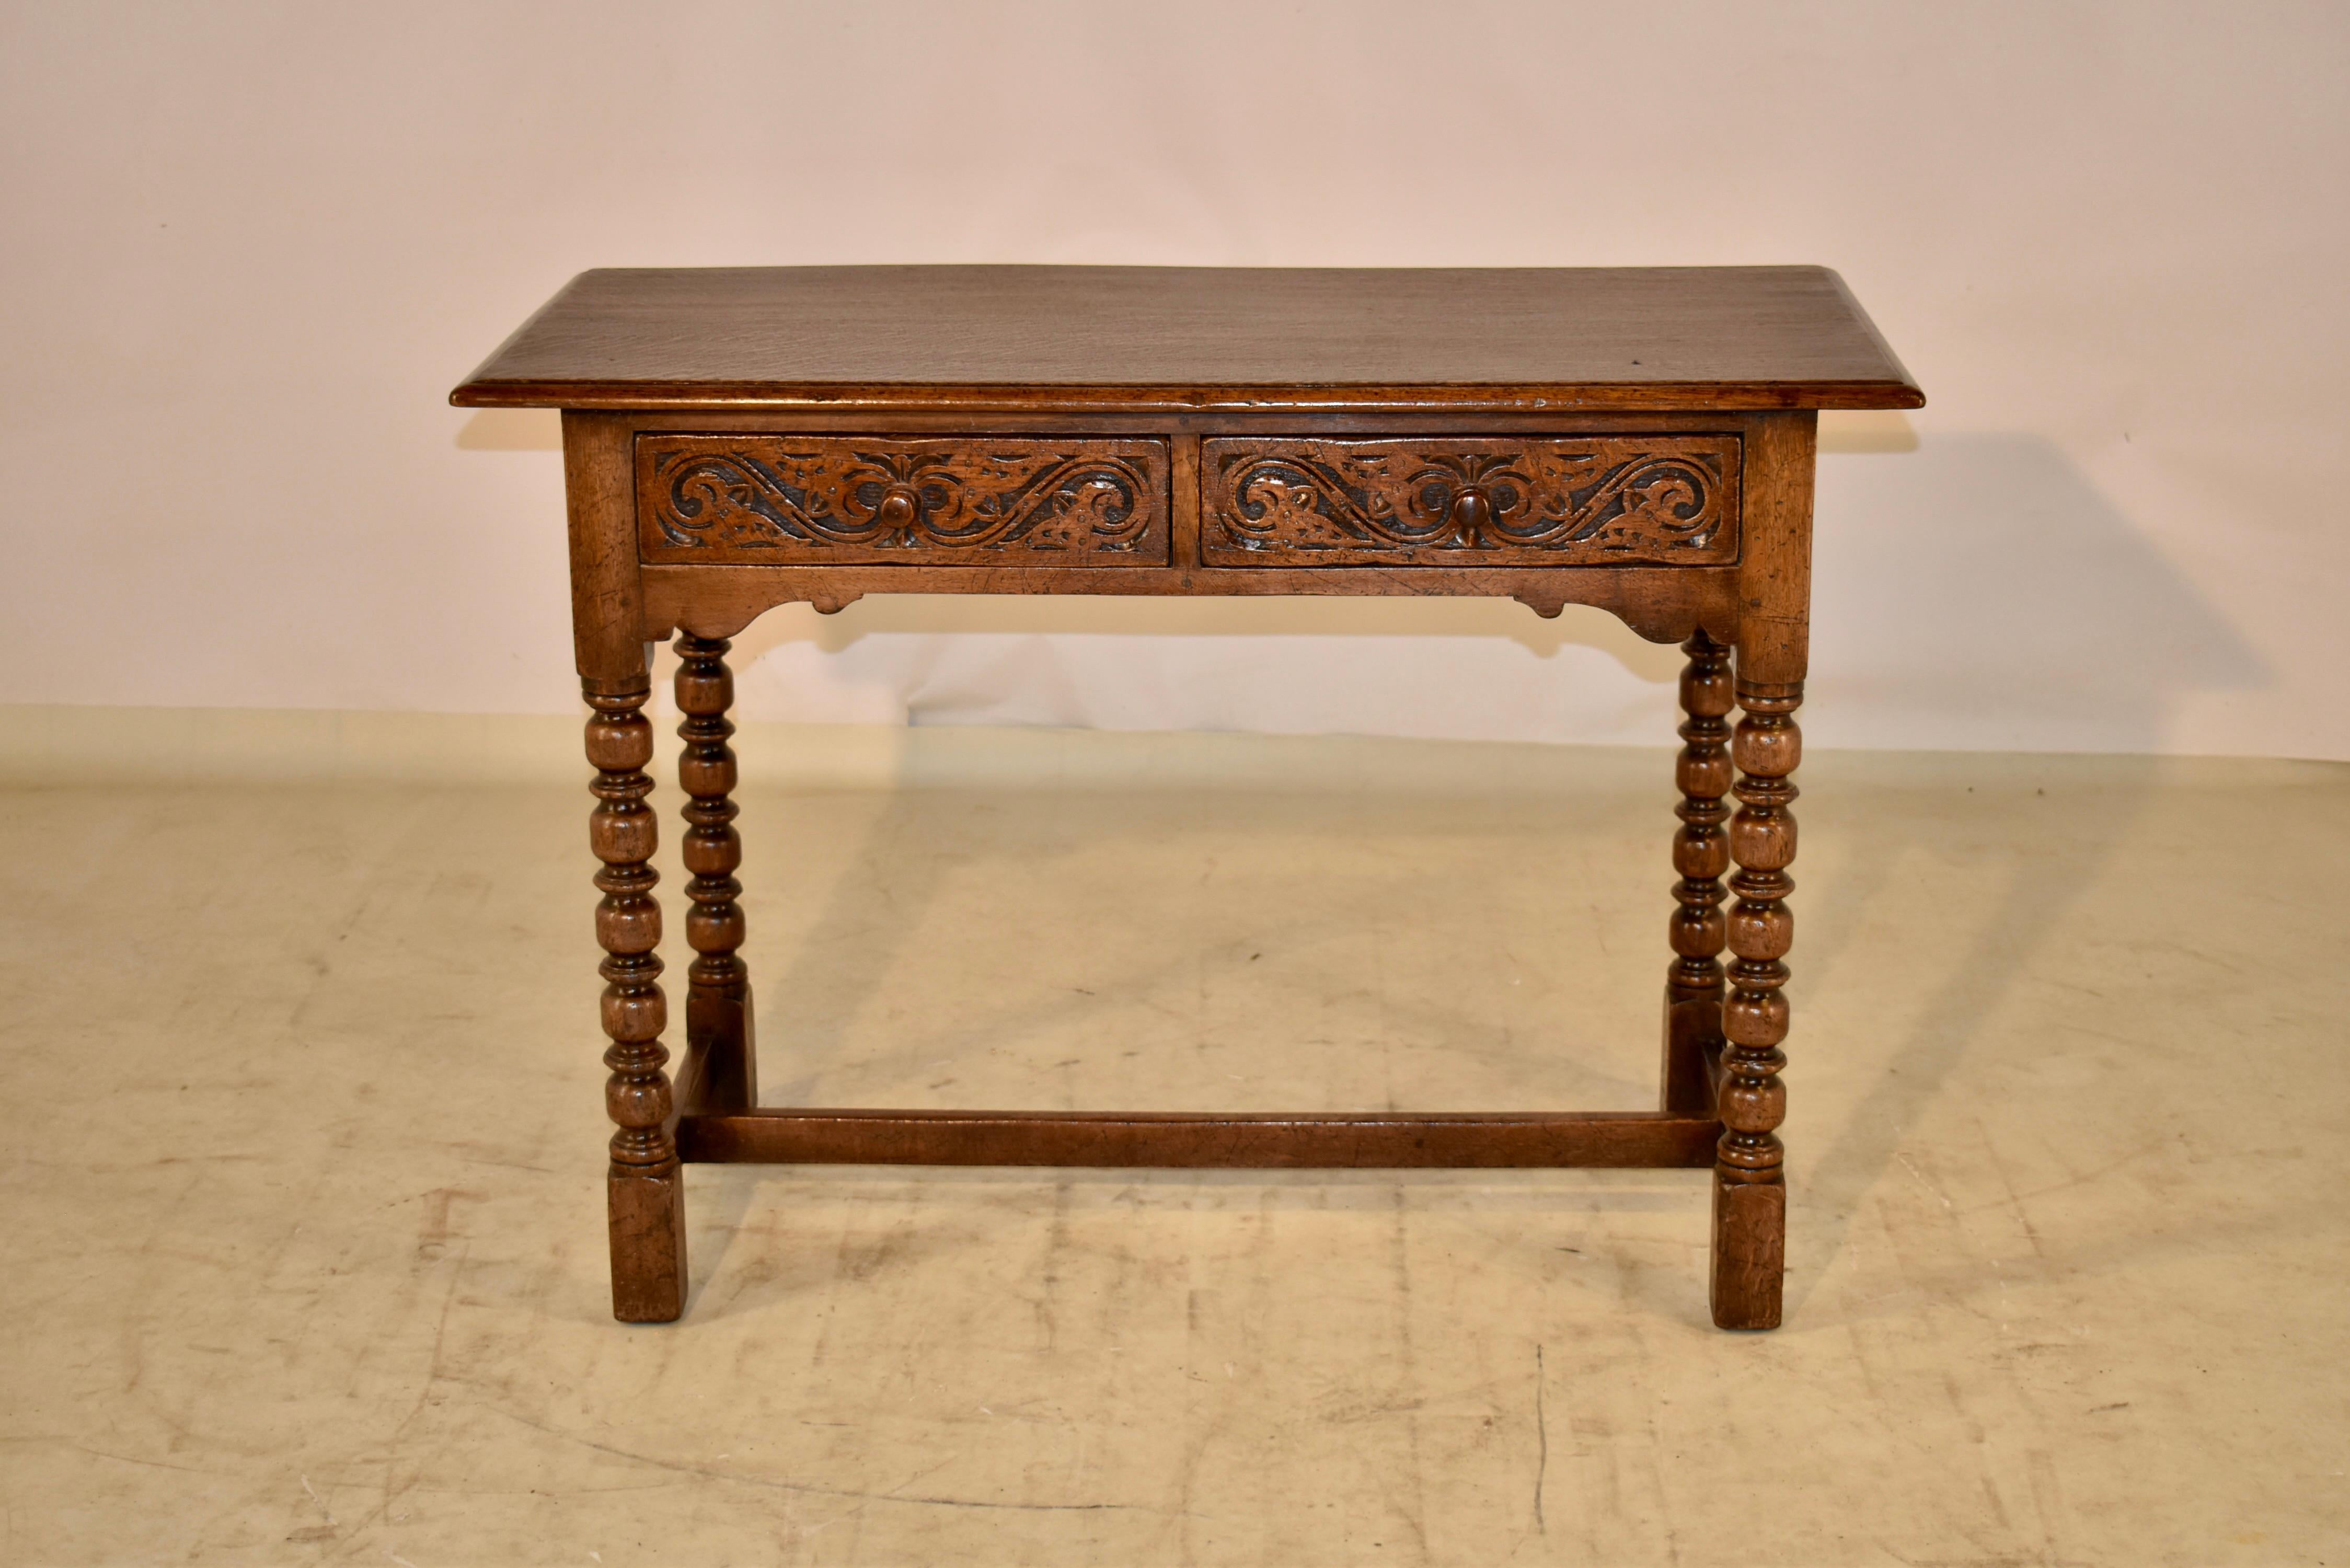 Late 19th century oak console table from England with a beveled edge around the two board top, over simple sides and two drawers in the front, featuring hand carved decorated drawer fronts. The apron in the front is scalloped for added design